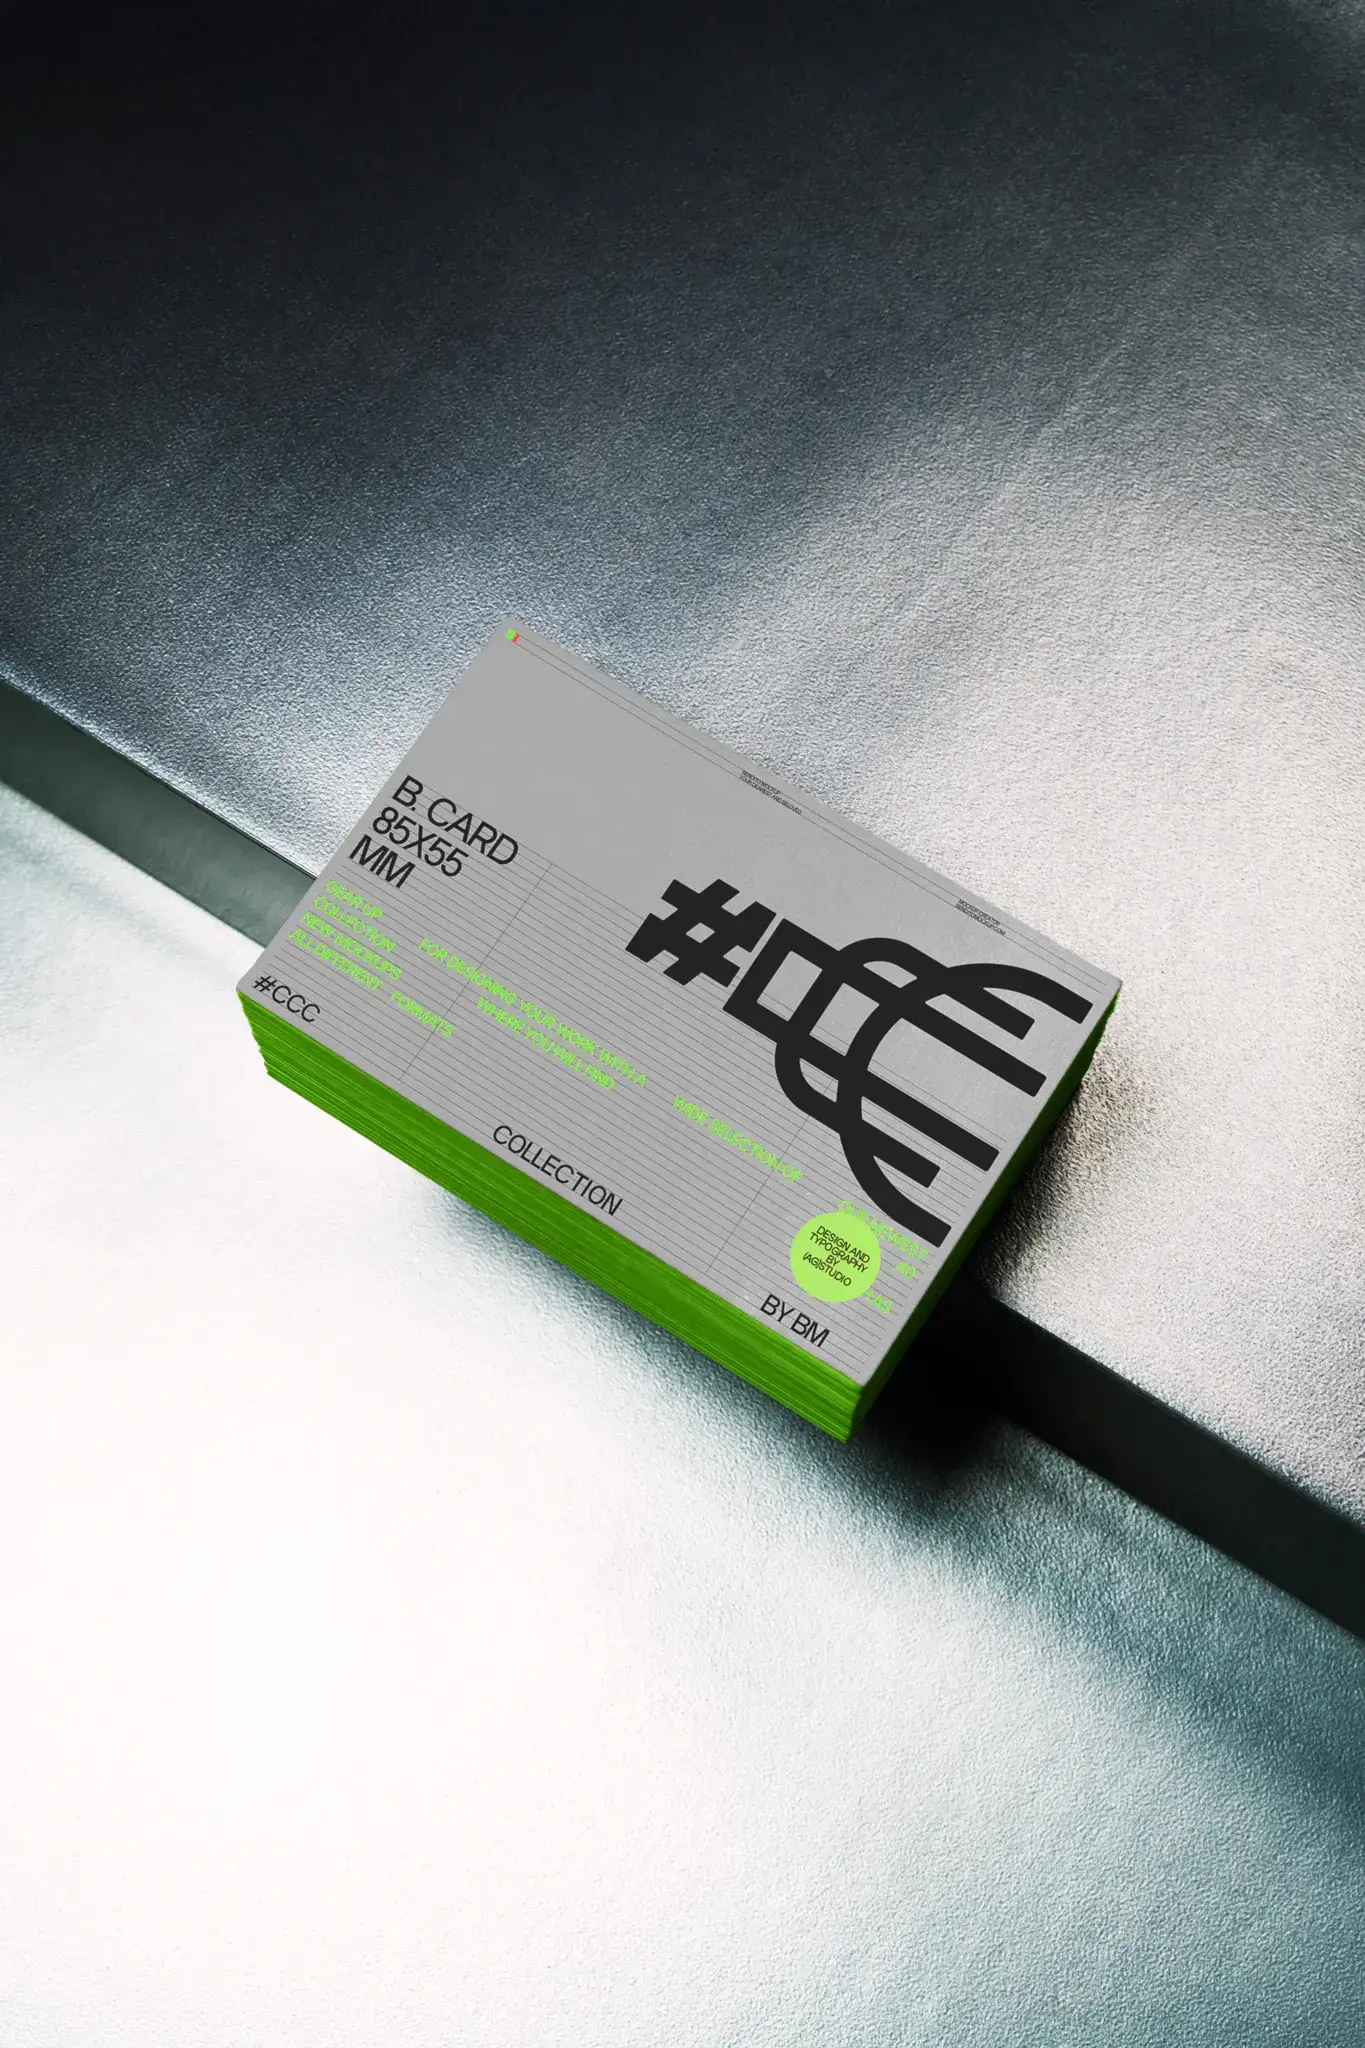 Business card mockup. Block of business cards placed on a metal surface. Branding mockup.